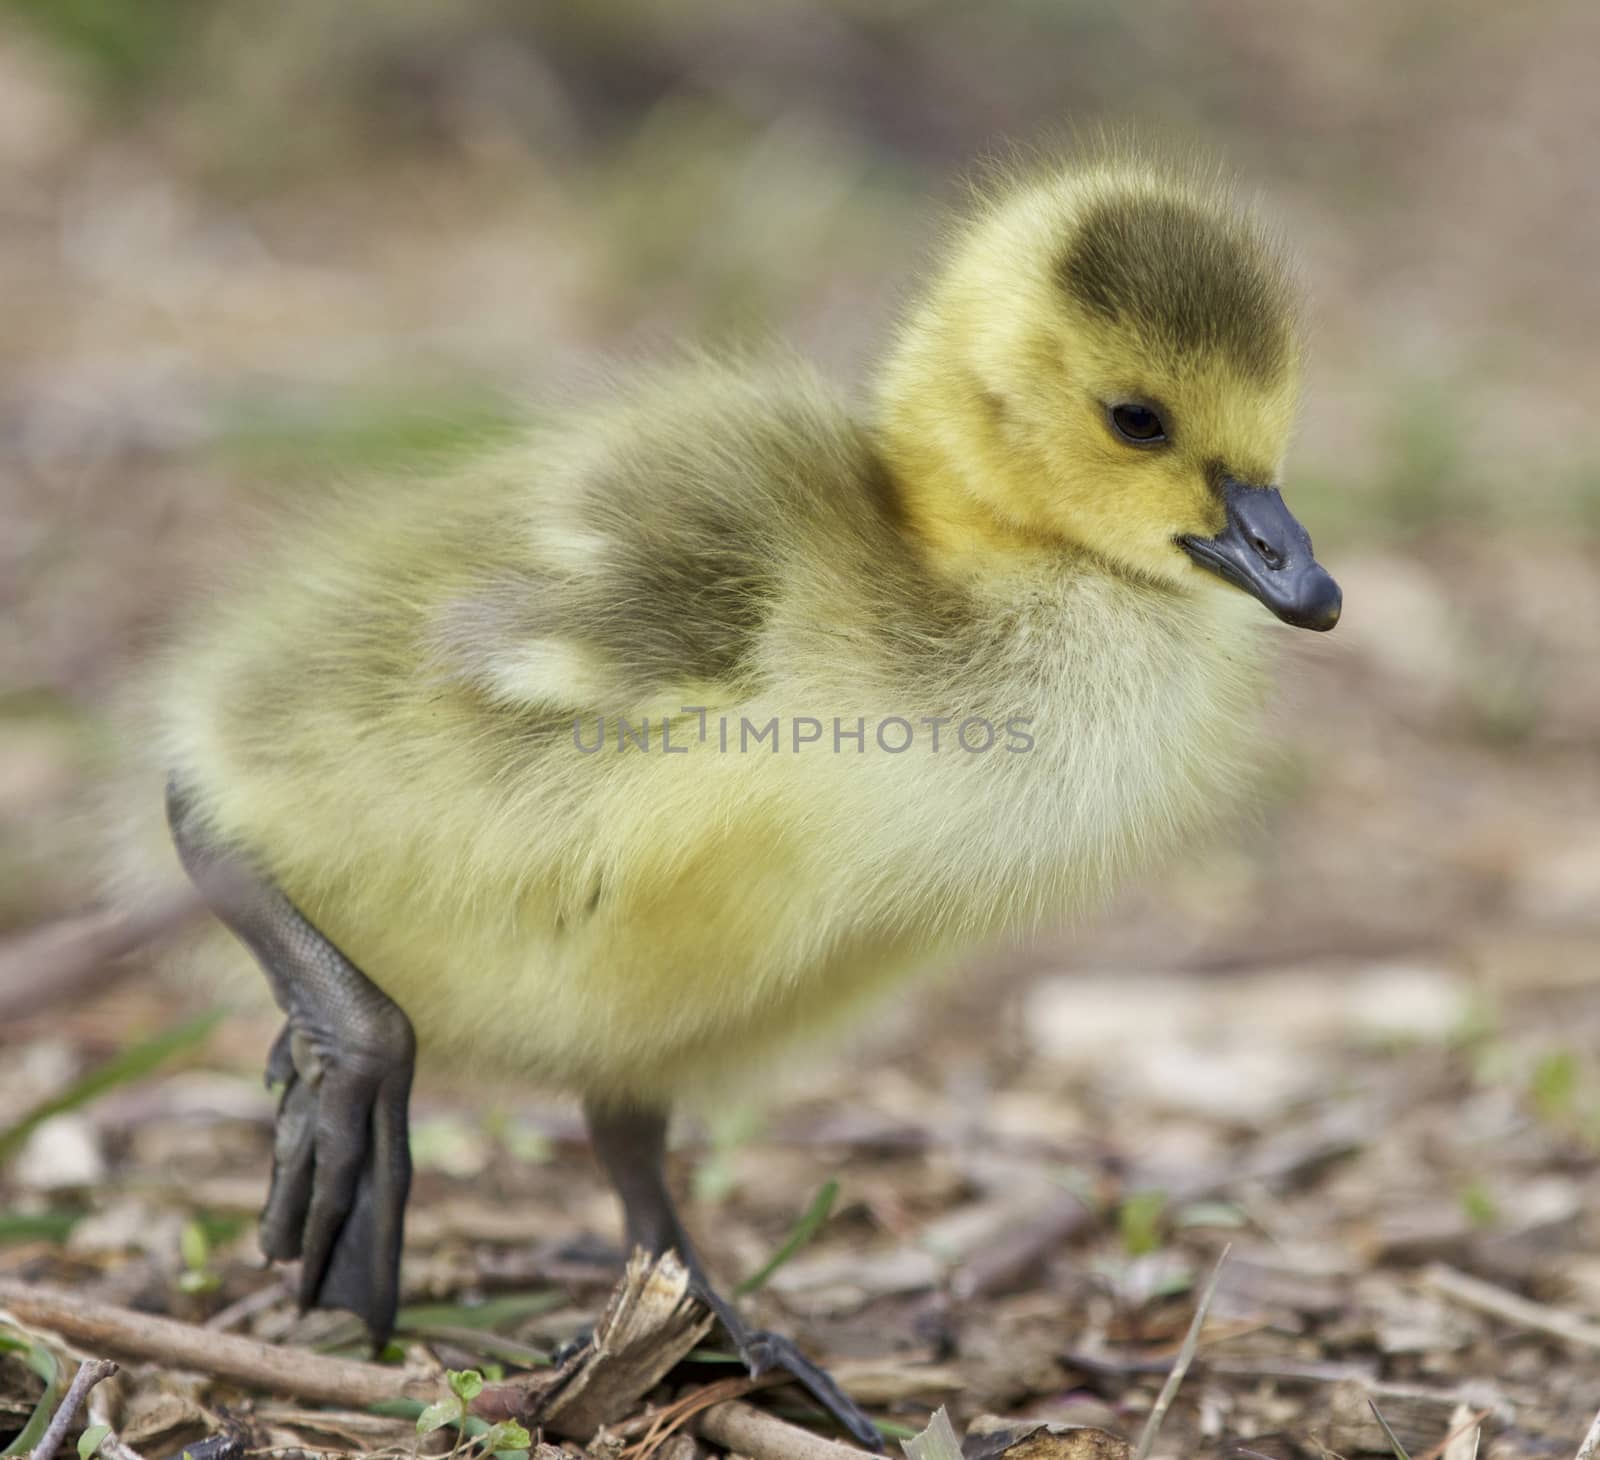 Beautiful isolated photo of a chick of Canada geese